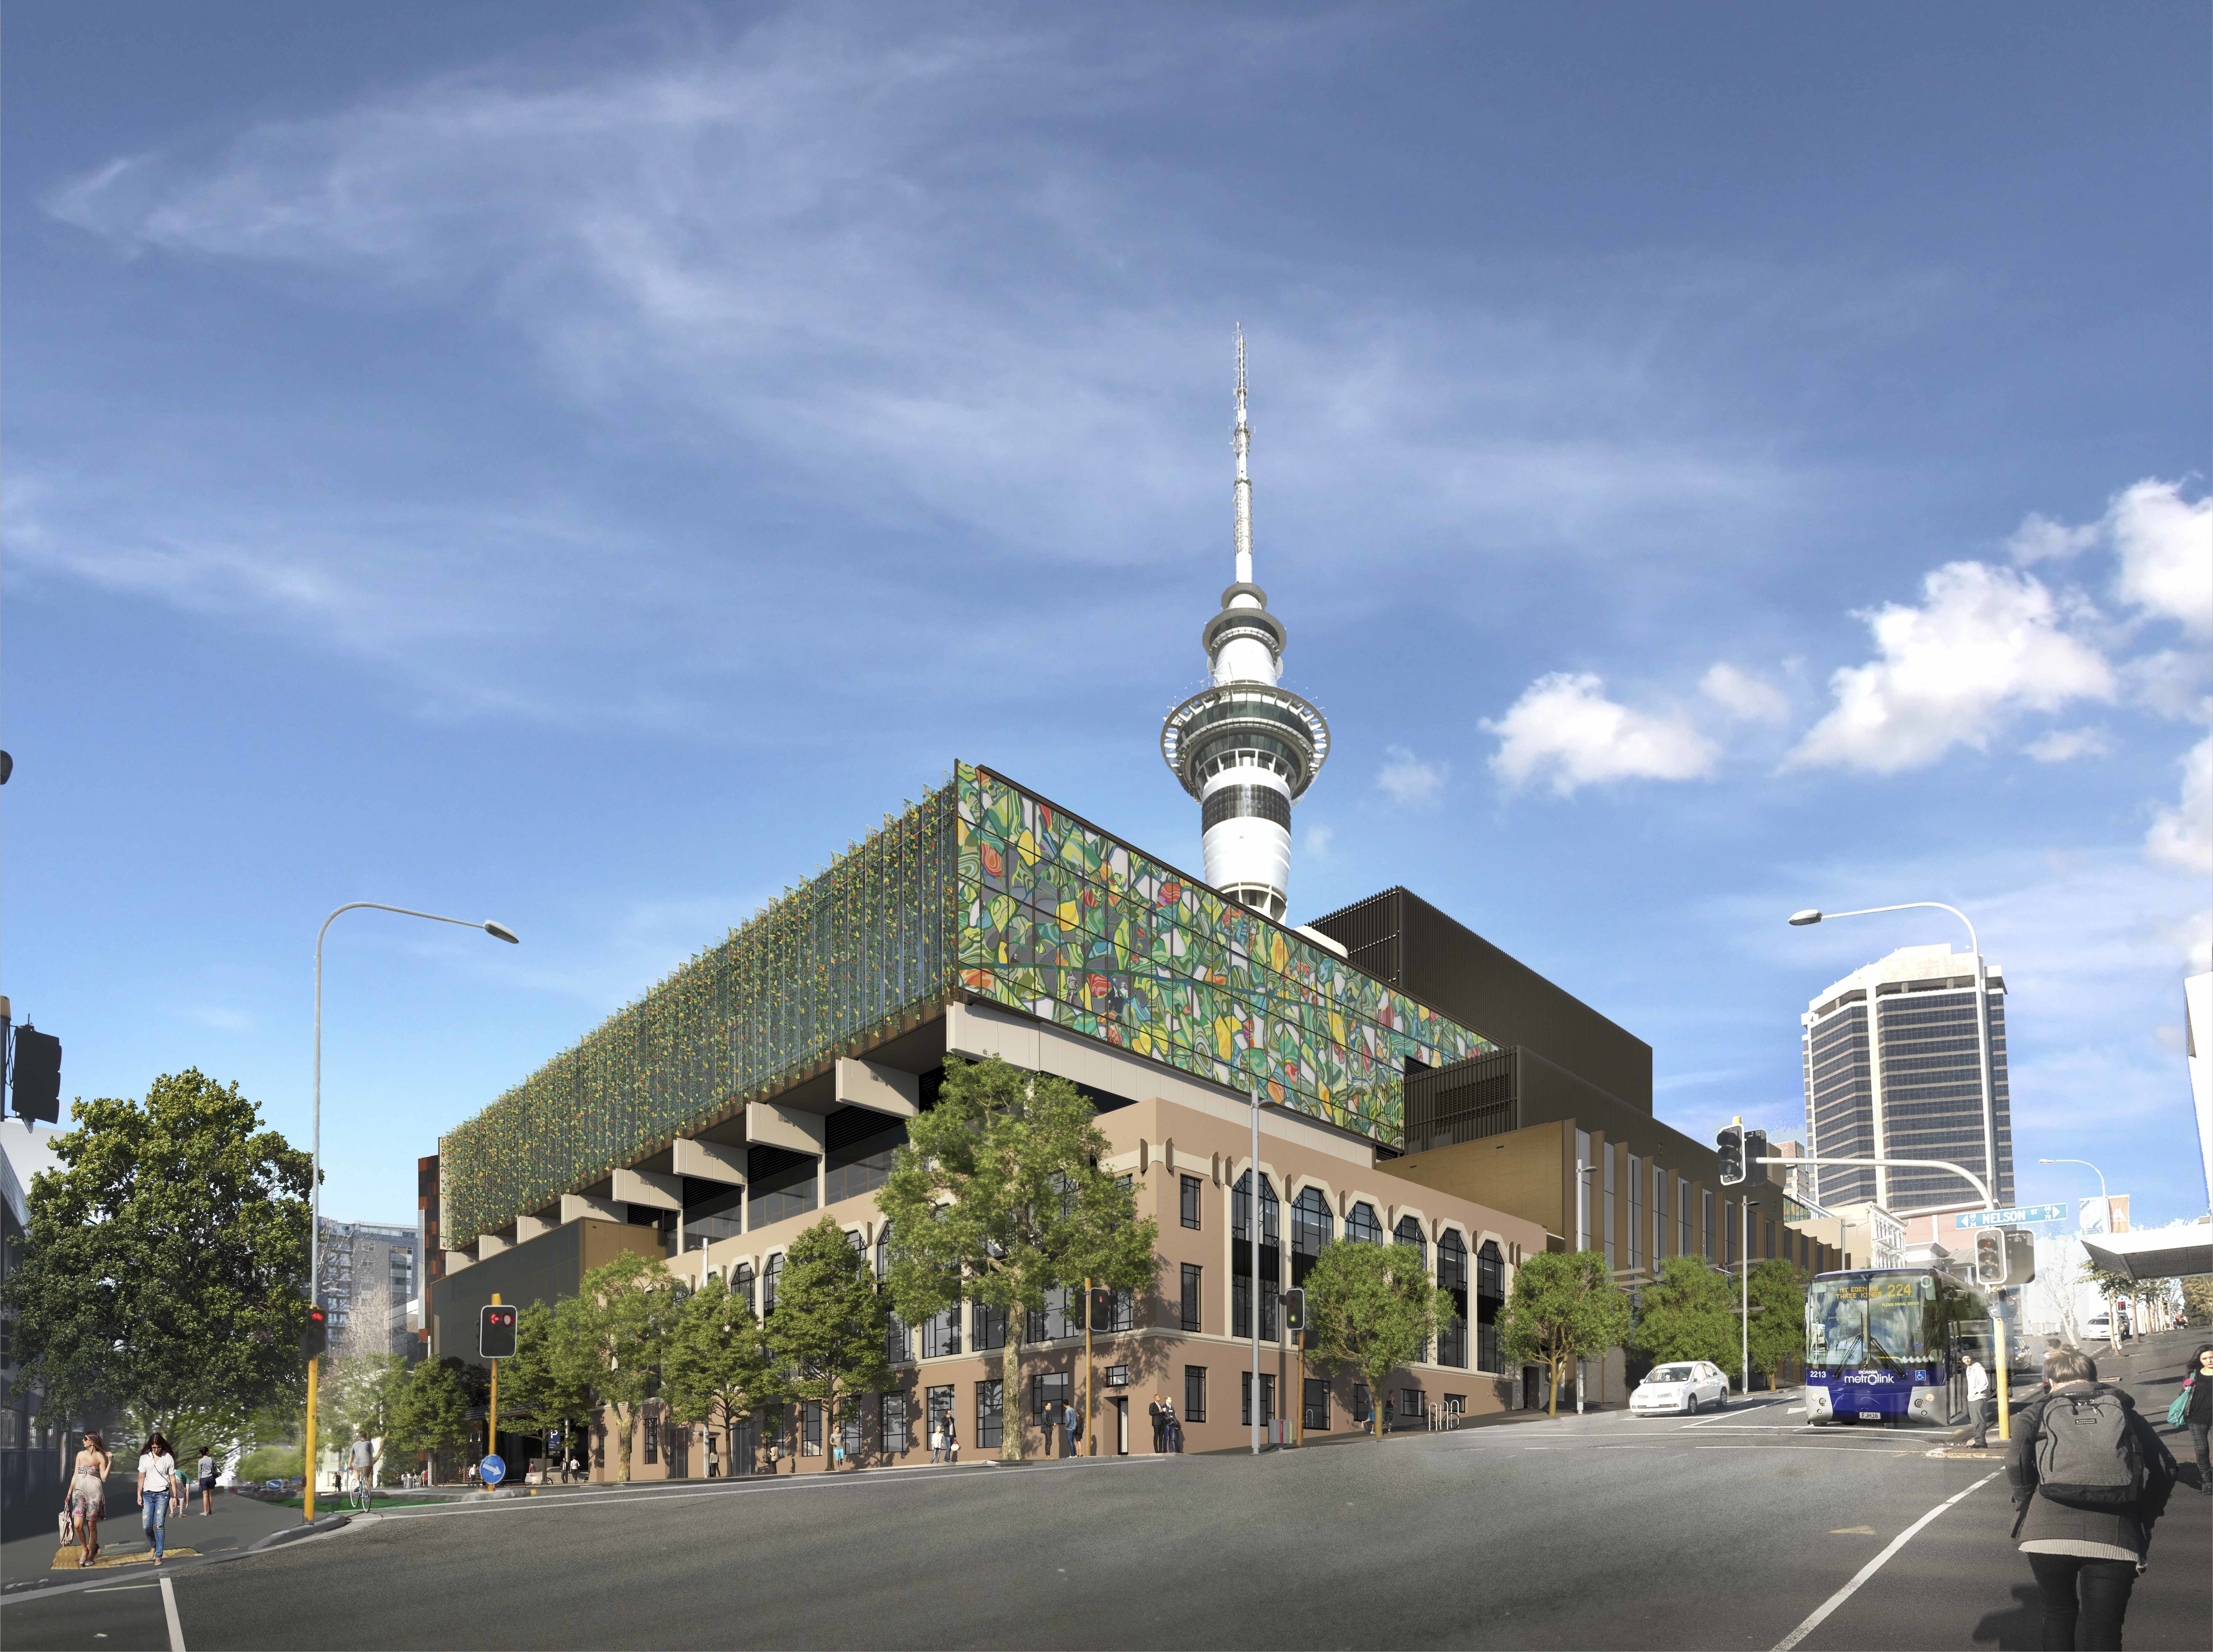 New Zealand artists’ work to cover exterior of New Zealand International Convention Centre